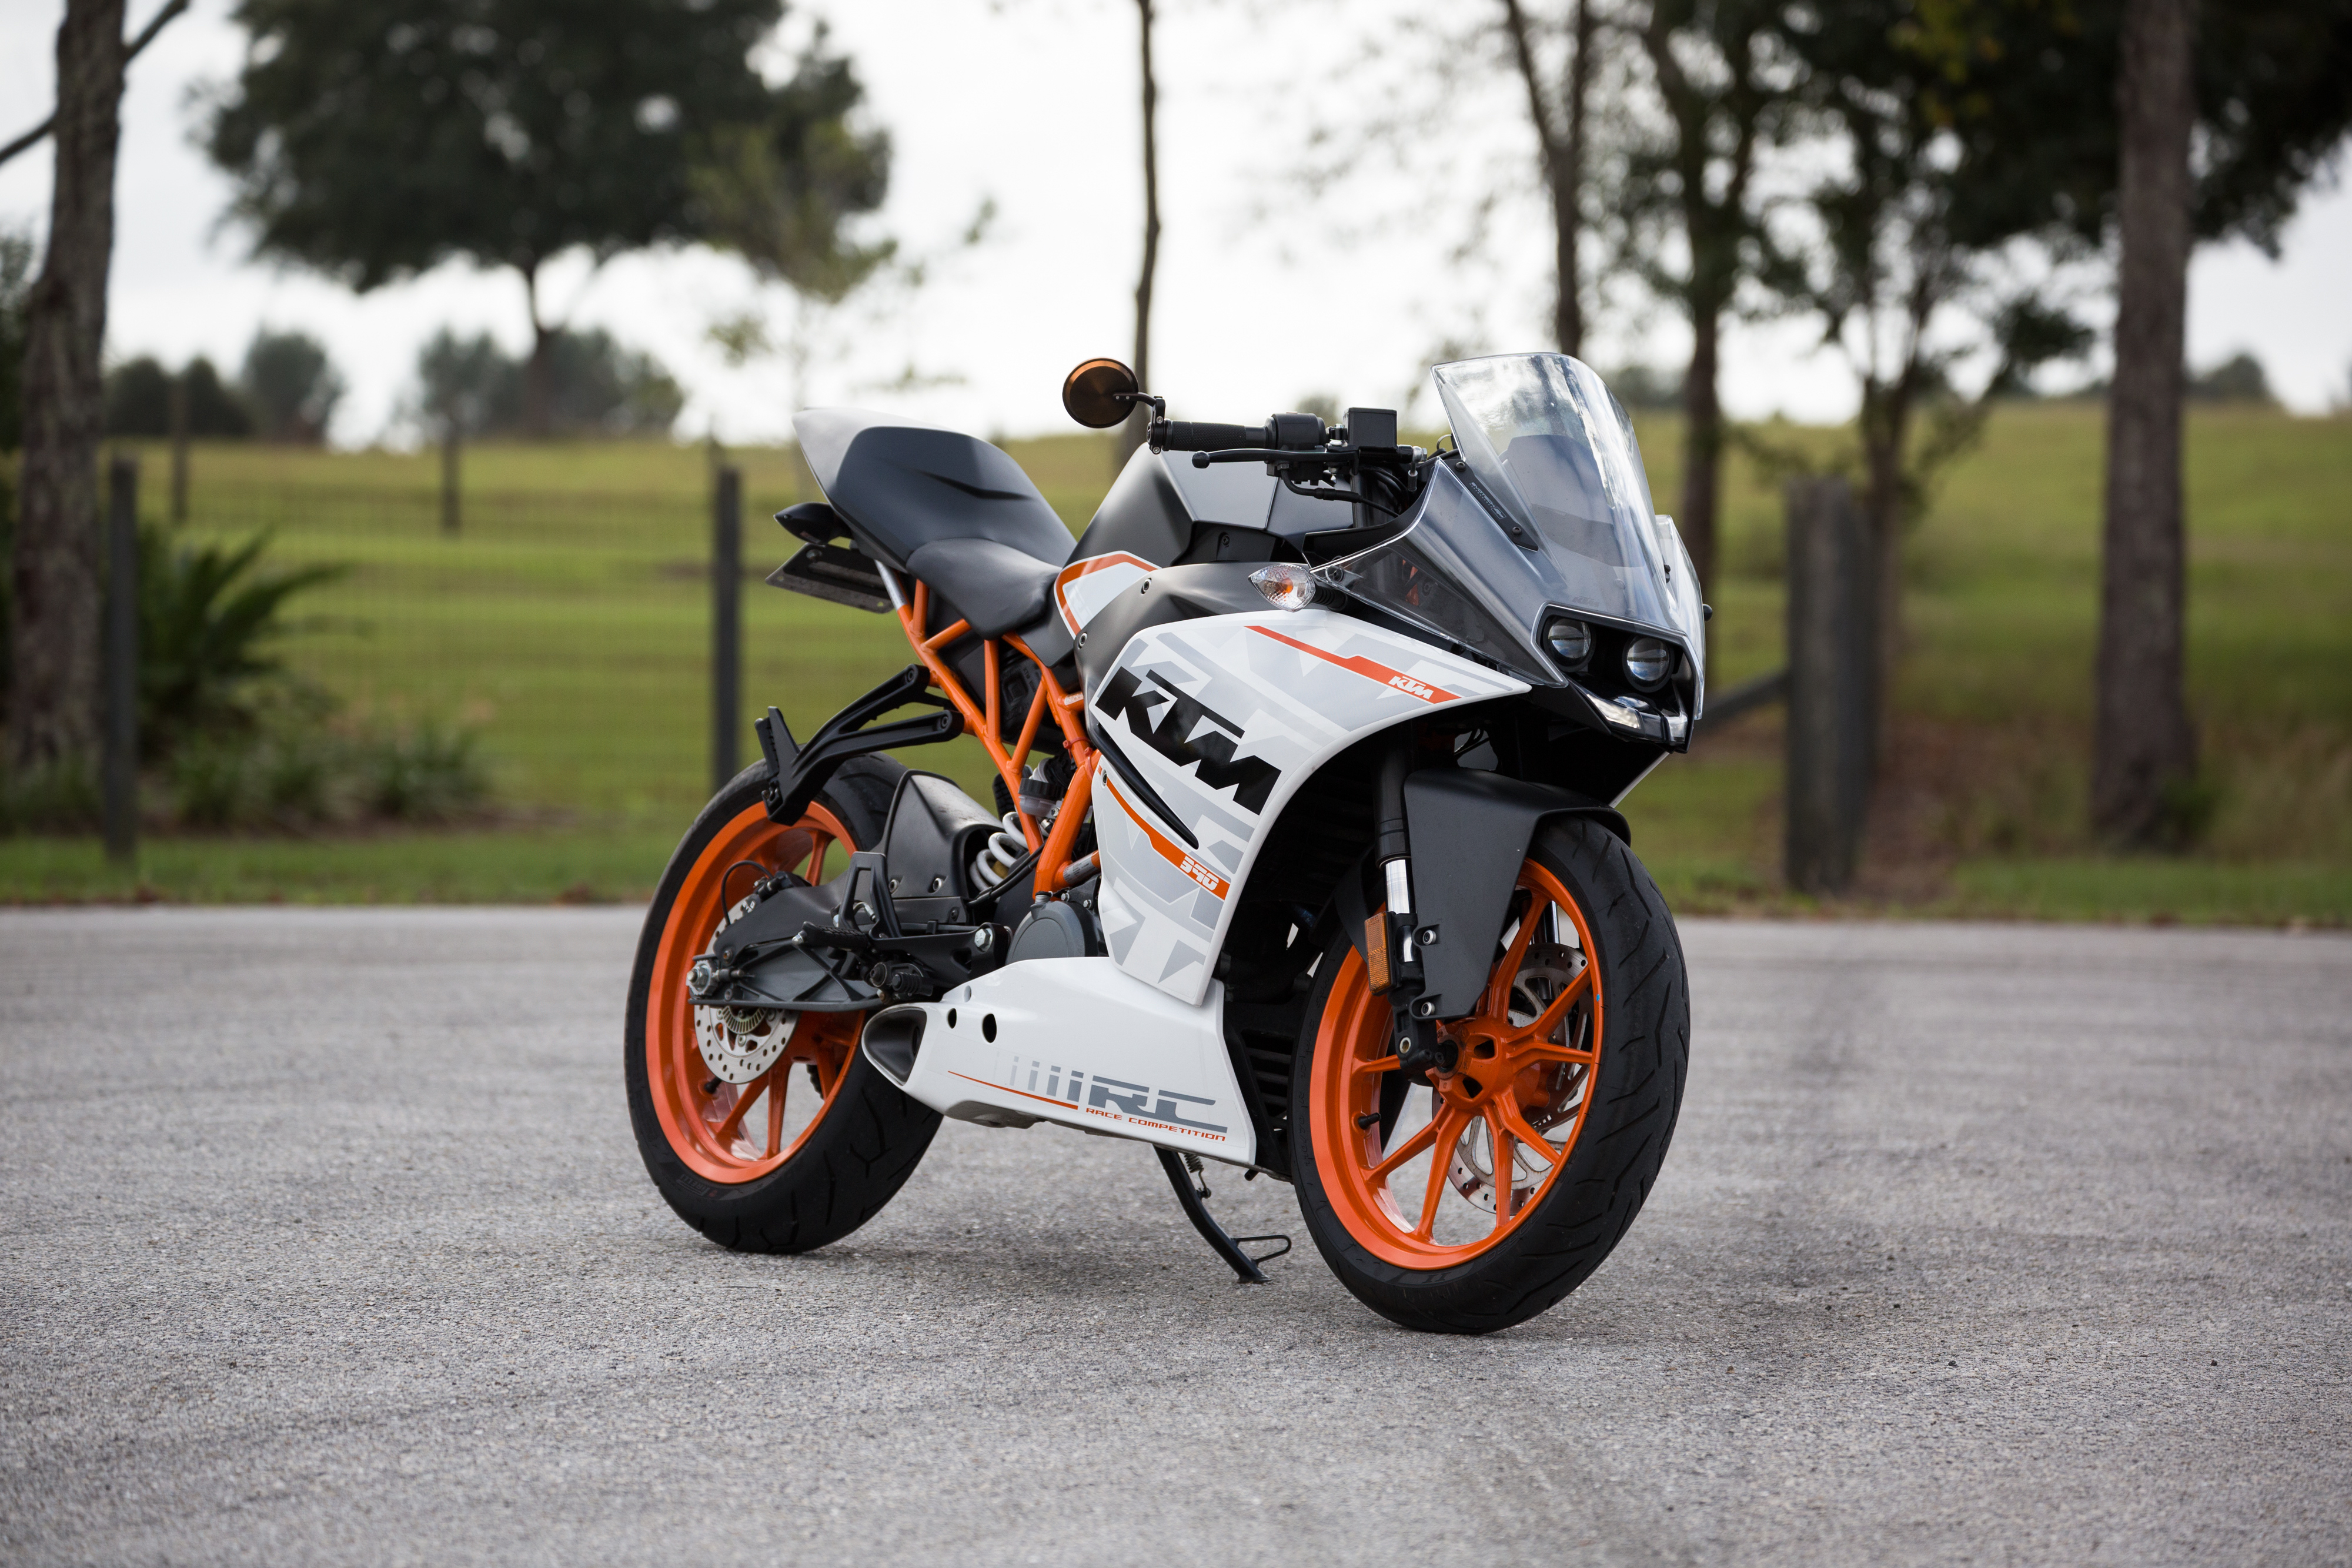 ktm, motorcycles, side view, motorcycle QHD